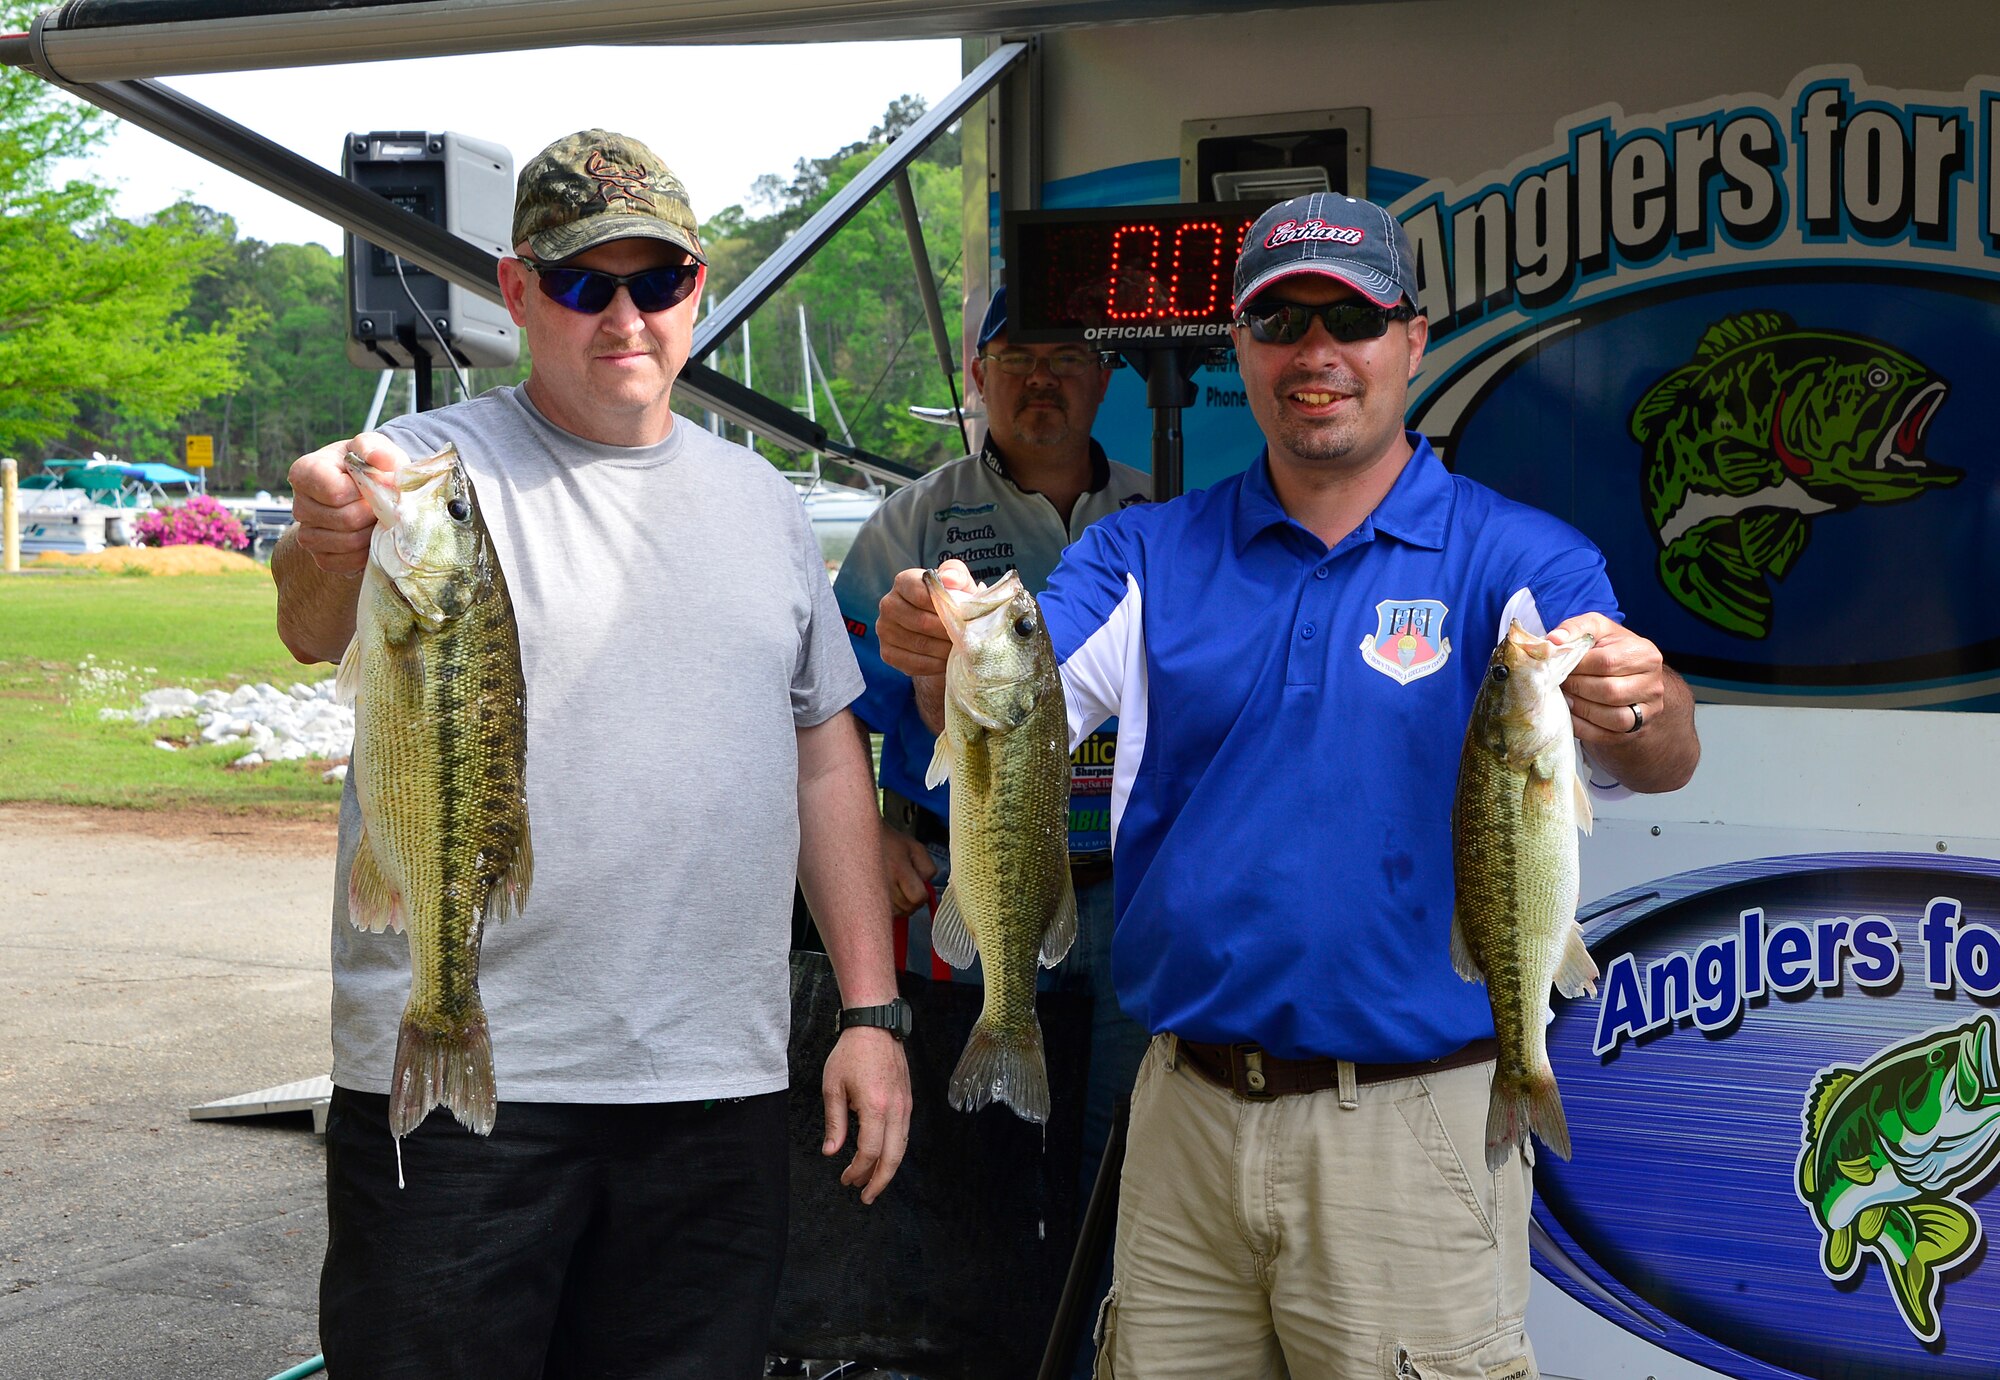 ALEXANDER CITY, Ala. - Chief Master Sgt. Herb Ward, left, and Master Sgt. Brian Shaner hold up three of the fish they reeled in during day one of the 20th annual Air National Guard bass tournament at Lake Martin, Ala. Ward is from the 110th Airlift Wing, and Shaner is from the I.G. Brown Training and Education Center. (U.S. Air National Guard photo by Master Sgt. Jerry Harlan/Released)